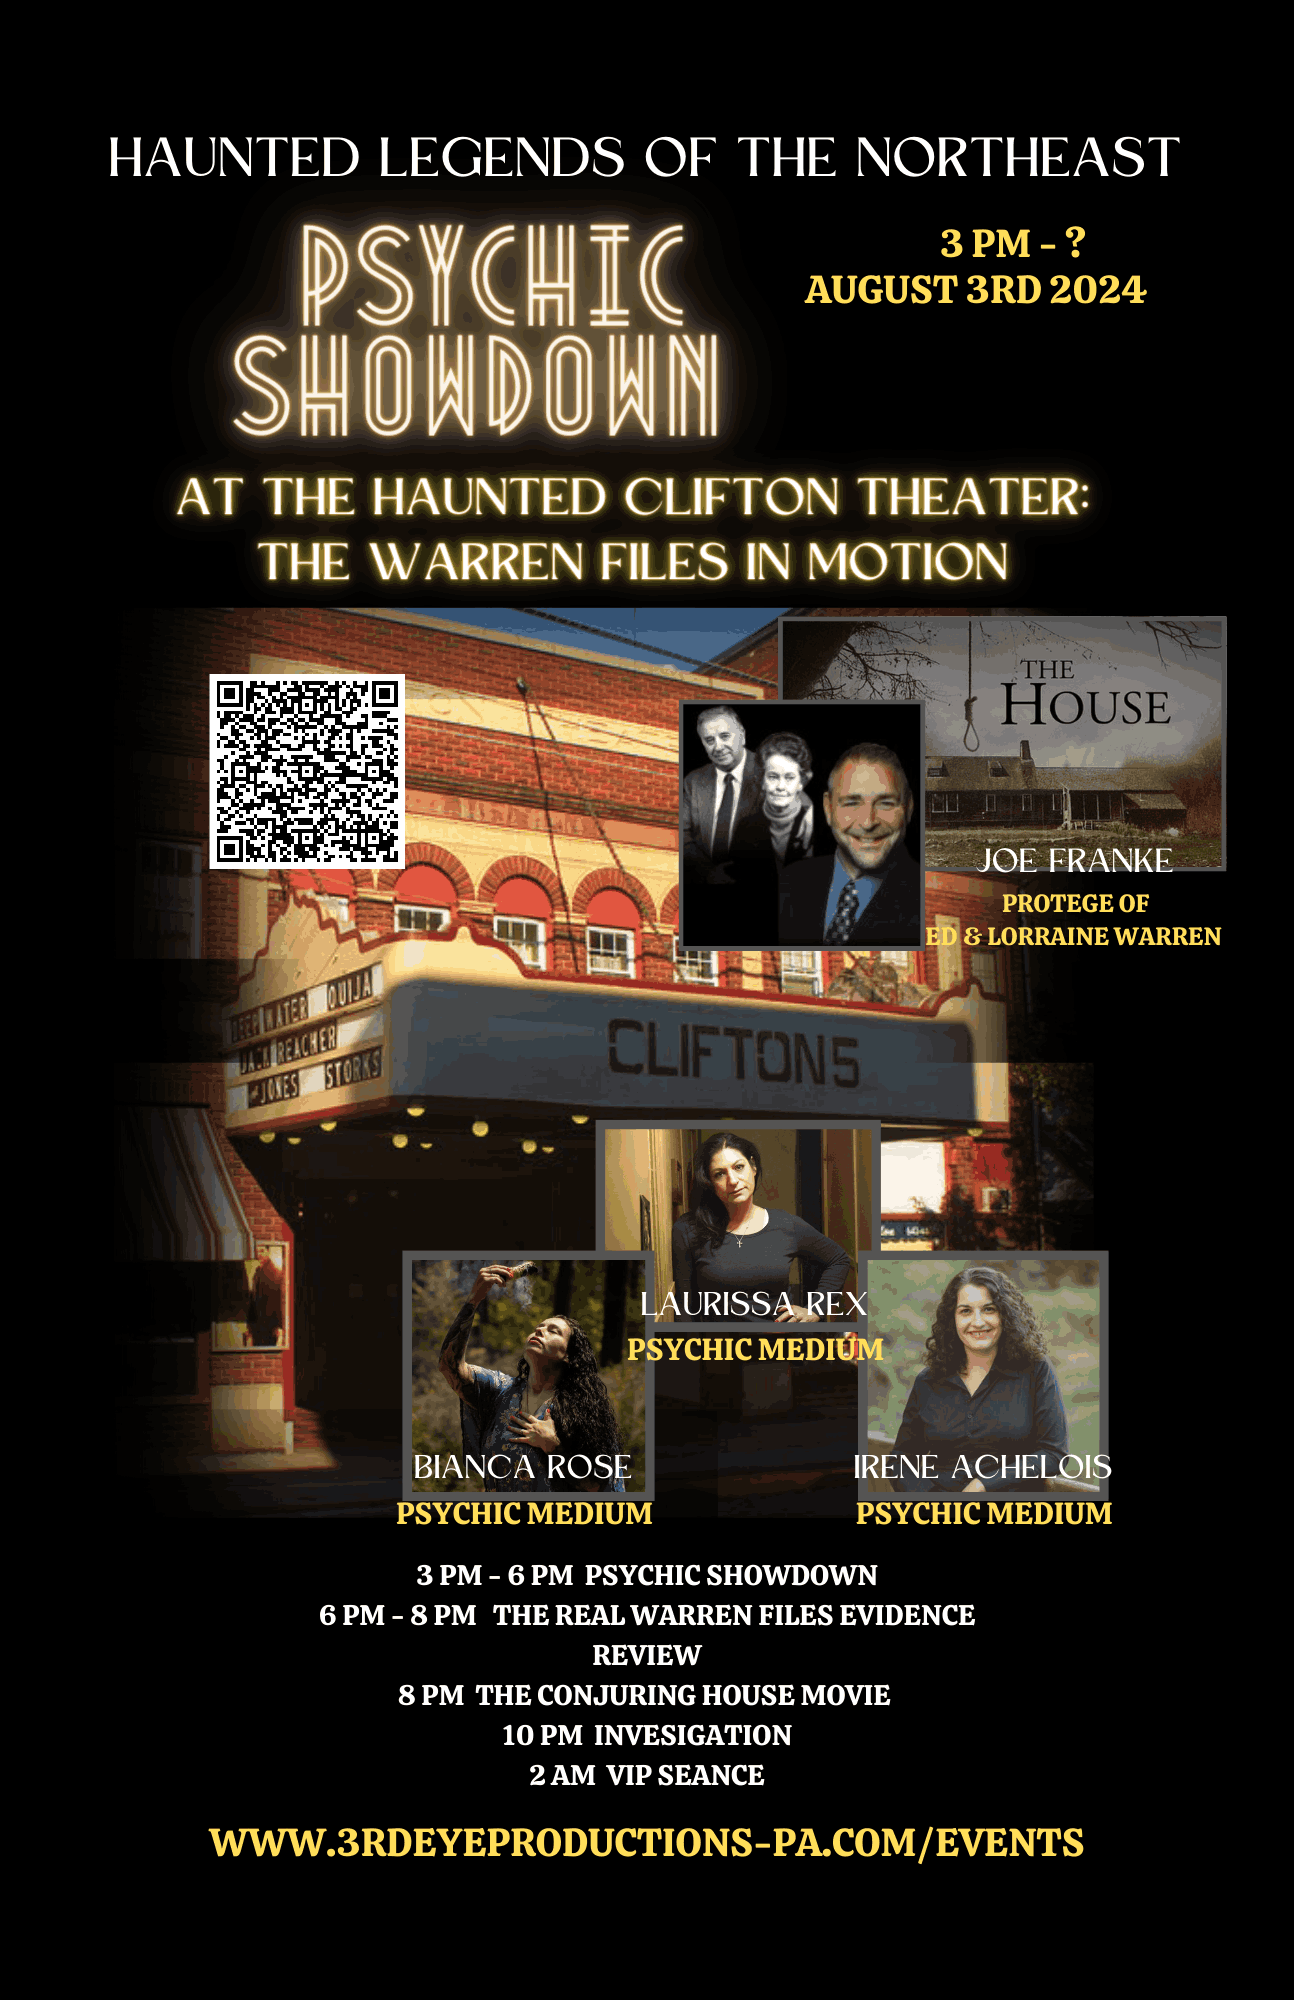 Haunted Legends of the Northeast: Psychic Showdown at the Clifton Theater  on août 03, 17:00@The Haunted Clifton Theater - Achetez des billets et obtenez des informations surThird Eye Event Productions, L 